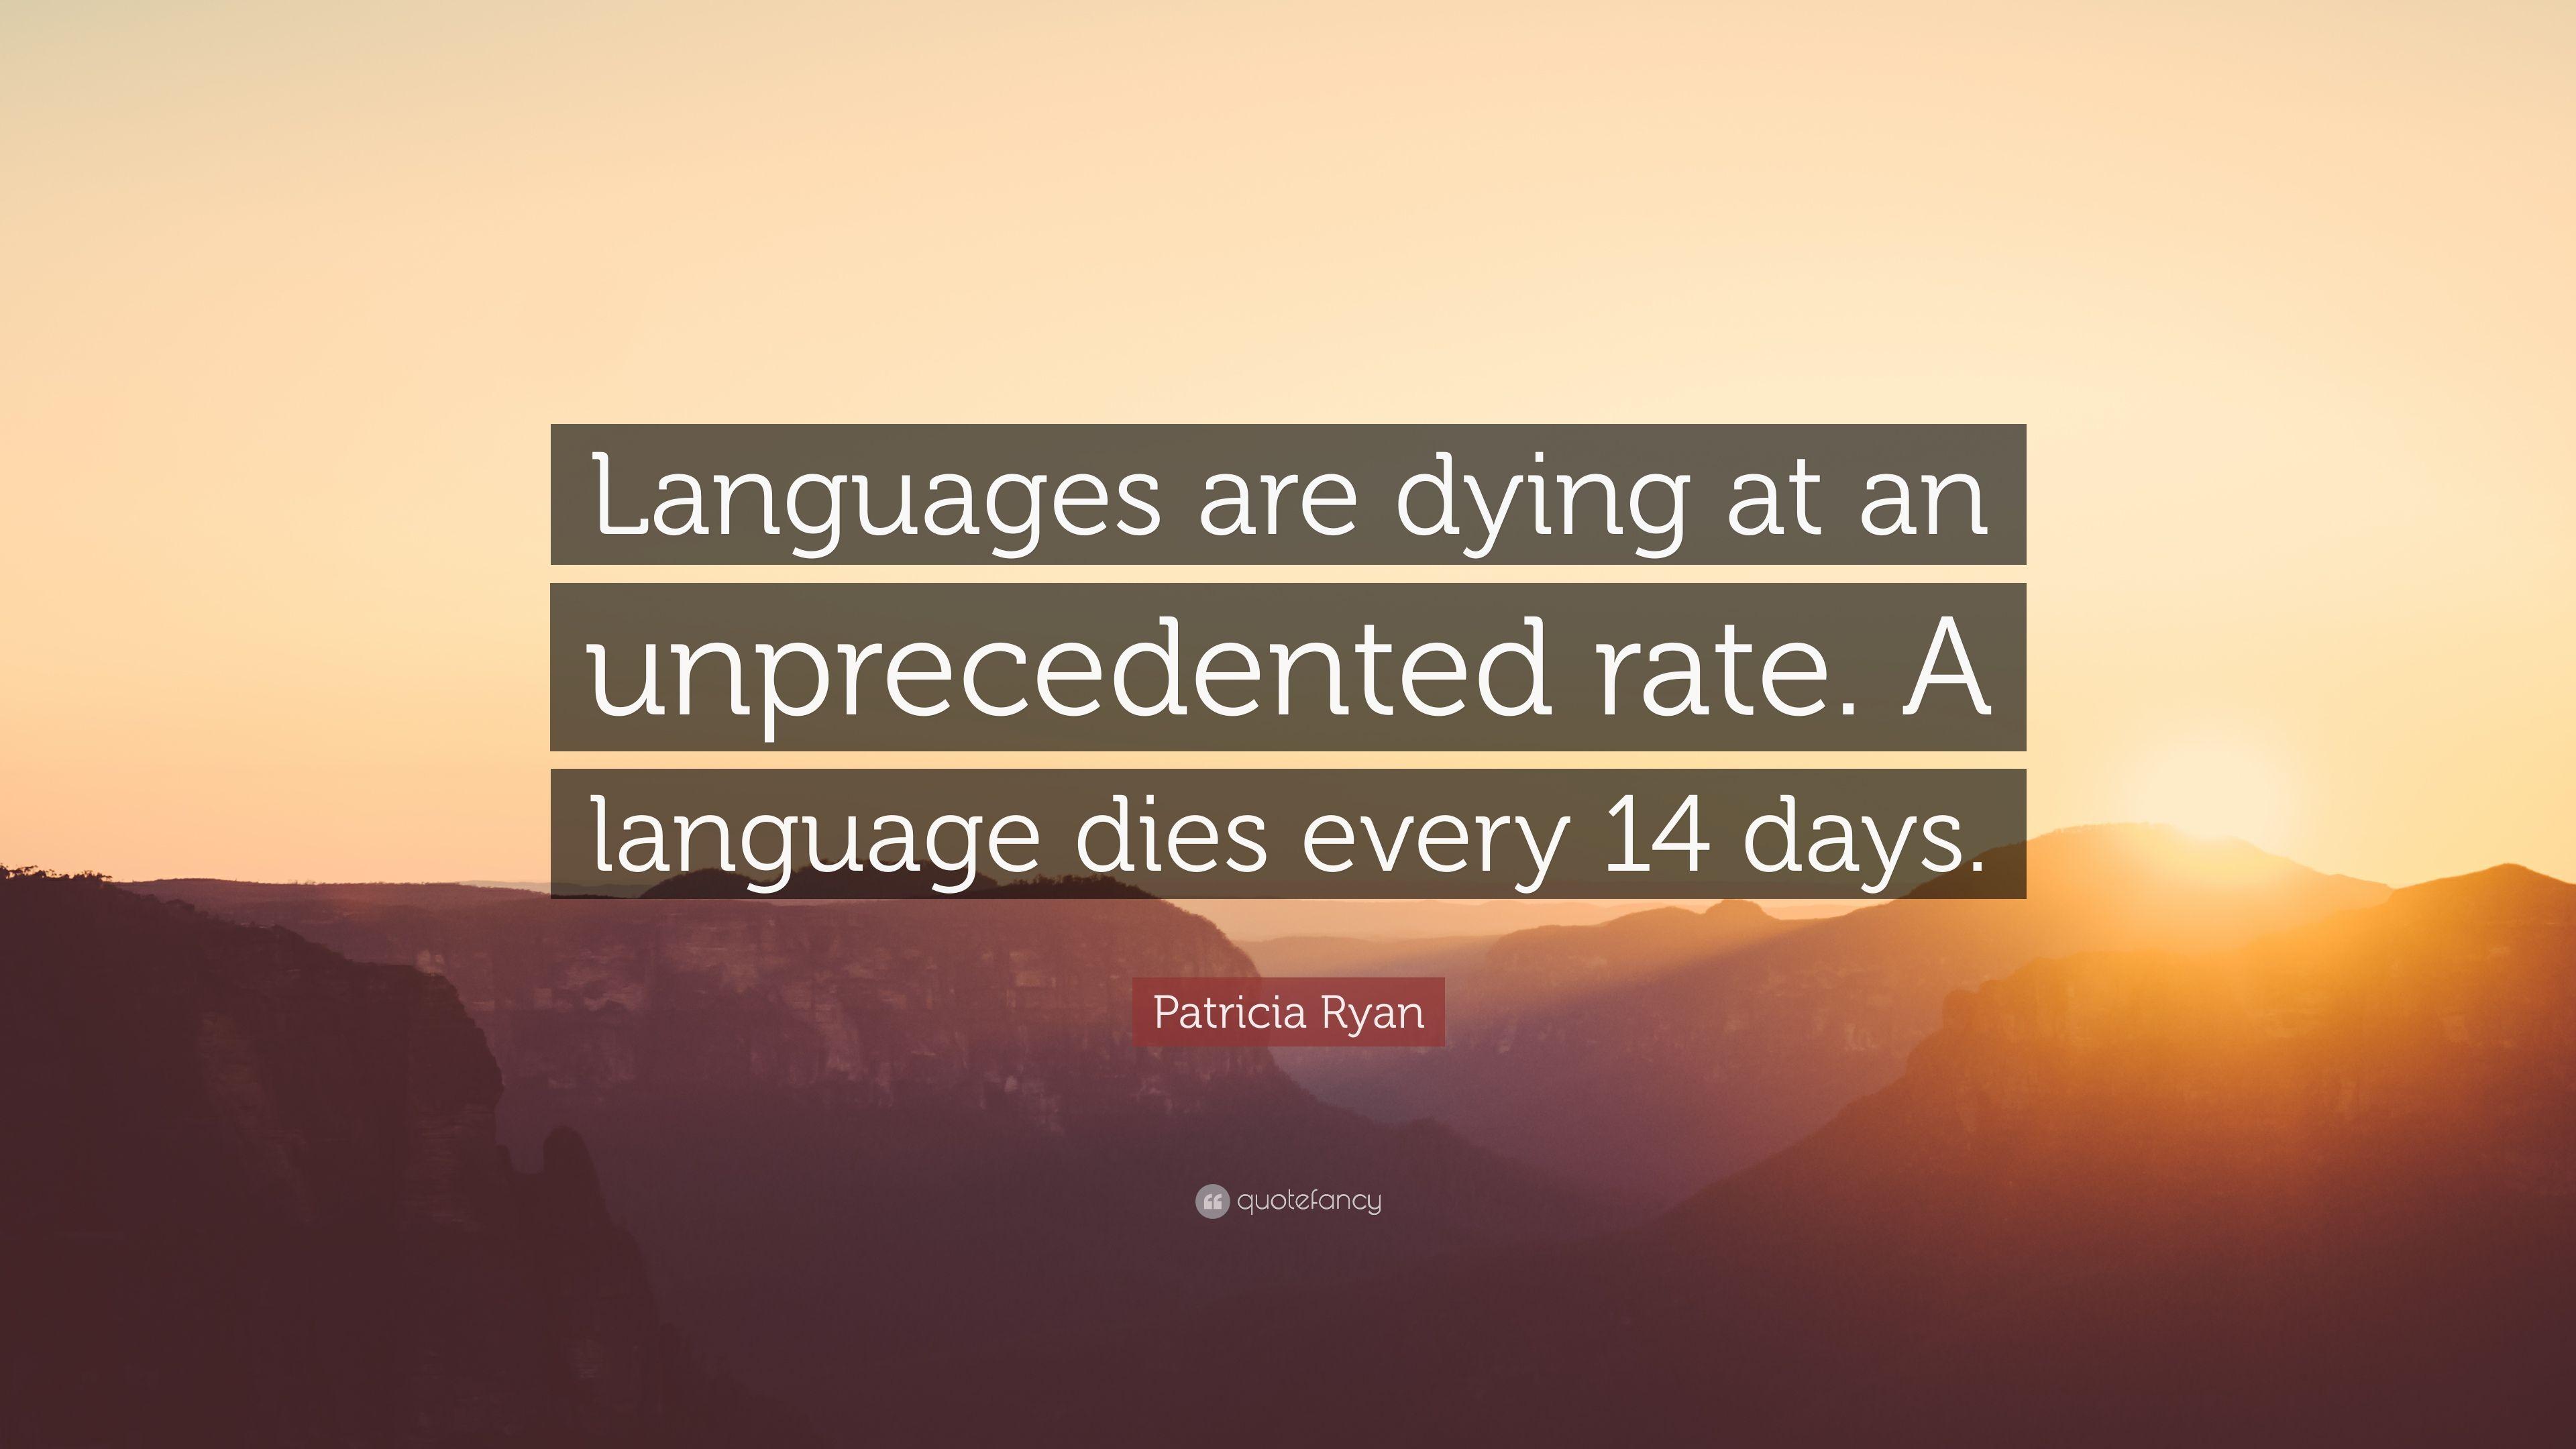 Patricia Ryan Quote: “Languages are dying at an unprecedented rate